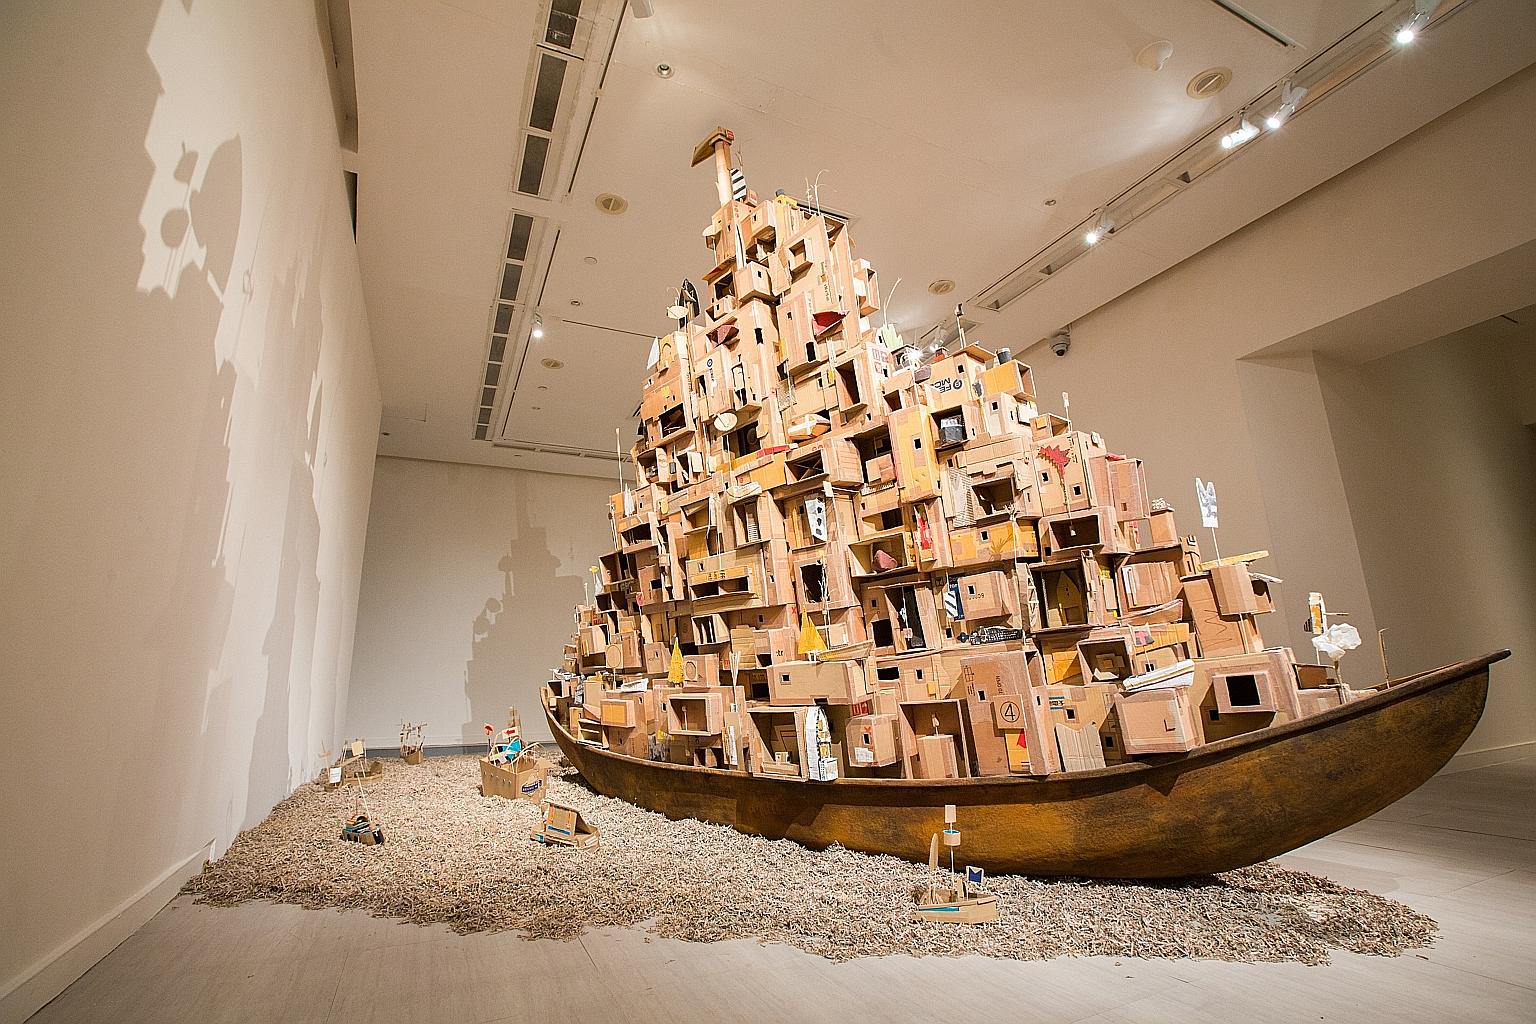 Massive Cardboard Installations by Isabel and Alfredo Aquizilan Investigate Migration and Community